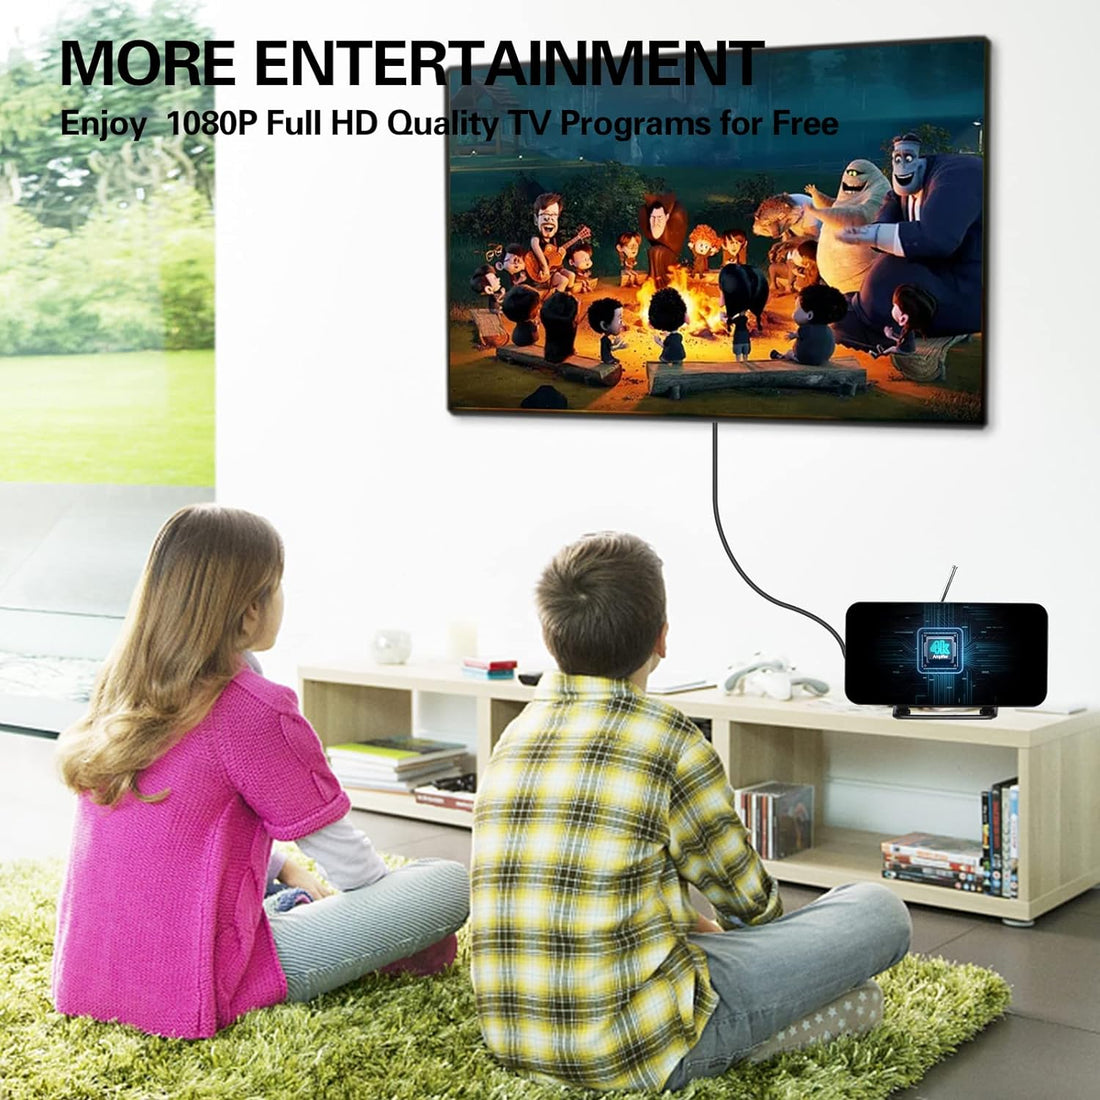 Antenna TV Digital HD Indoor - 350 Miles Long Range with Built-in Amplifier,32.8t Long Coax Cable Digital HDTV Antenna Support All Television, for Free Local Channels 4K HD 1080P VHF UHF (03)